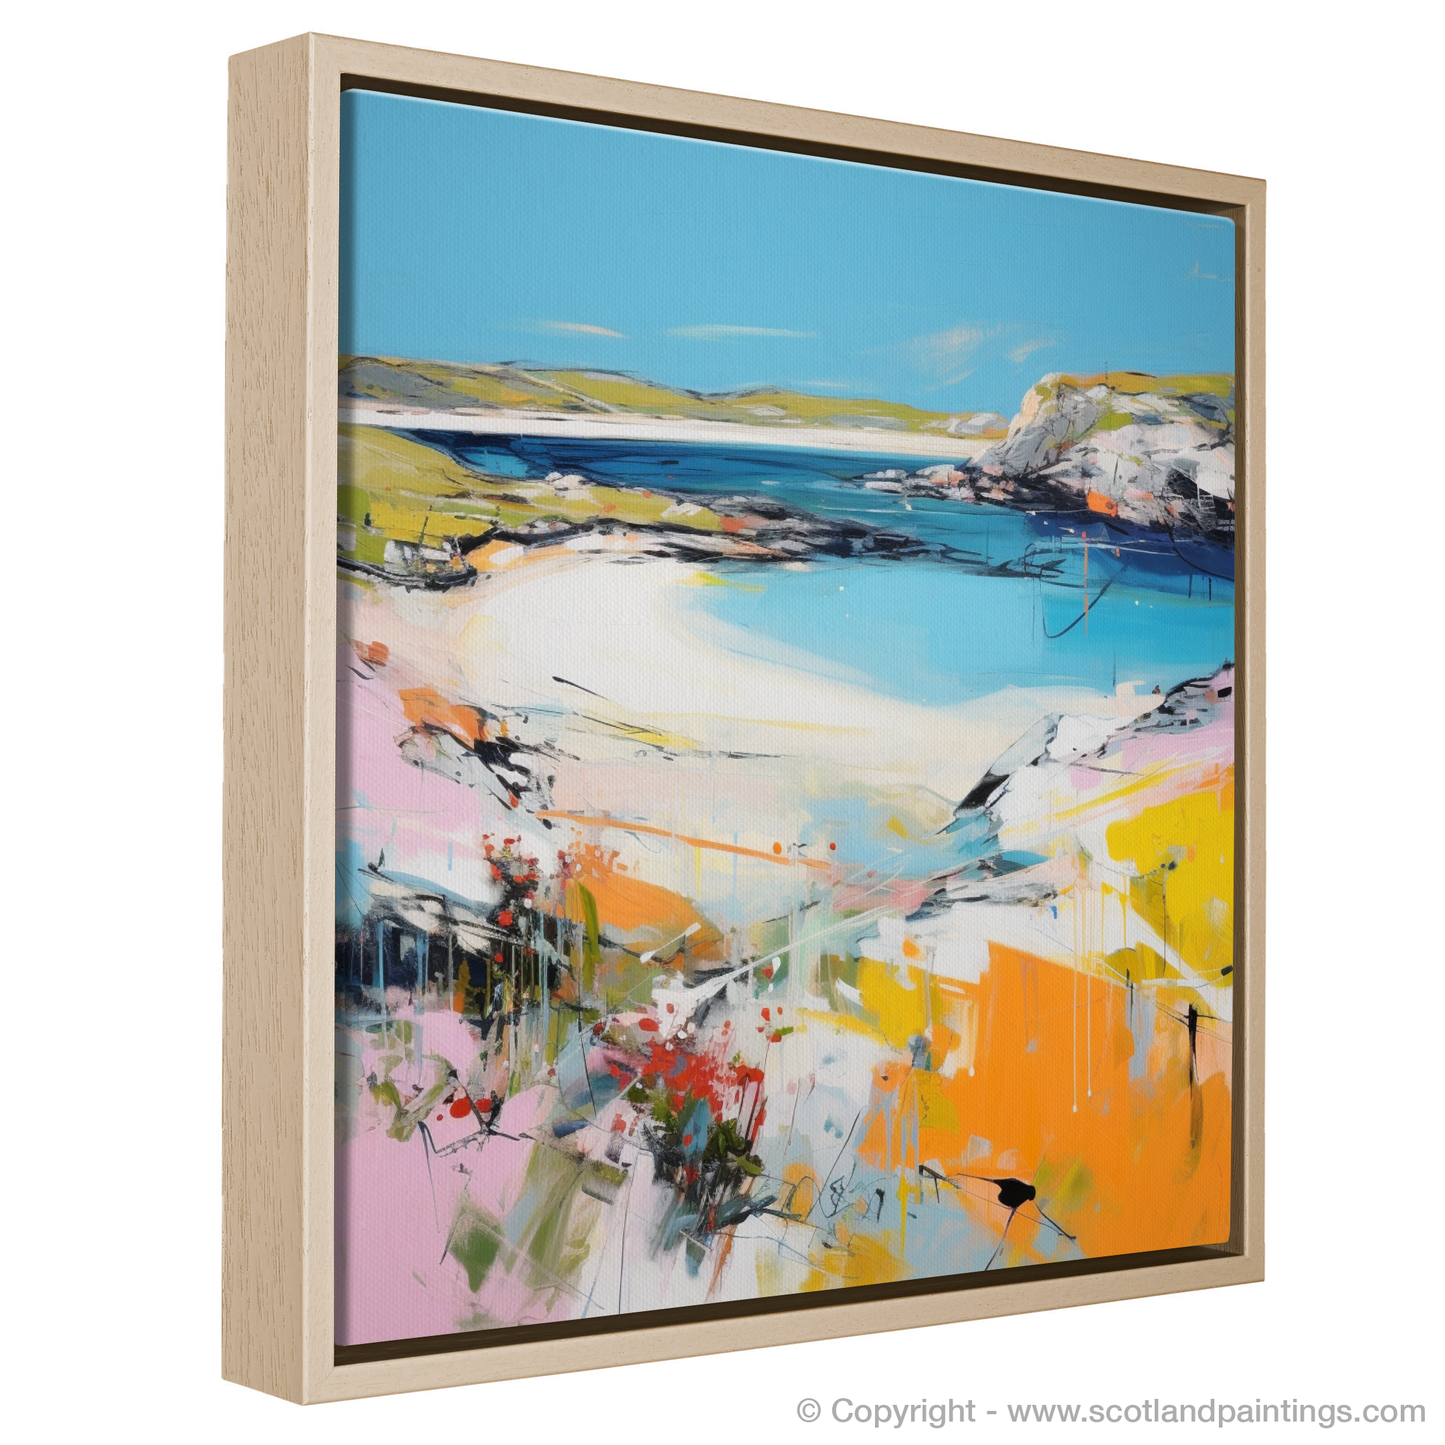 Painting and Art Print of Achmelvich Bay, Sutherland in summer entitled "Achmelvich Bay Summer Radiance".